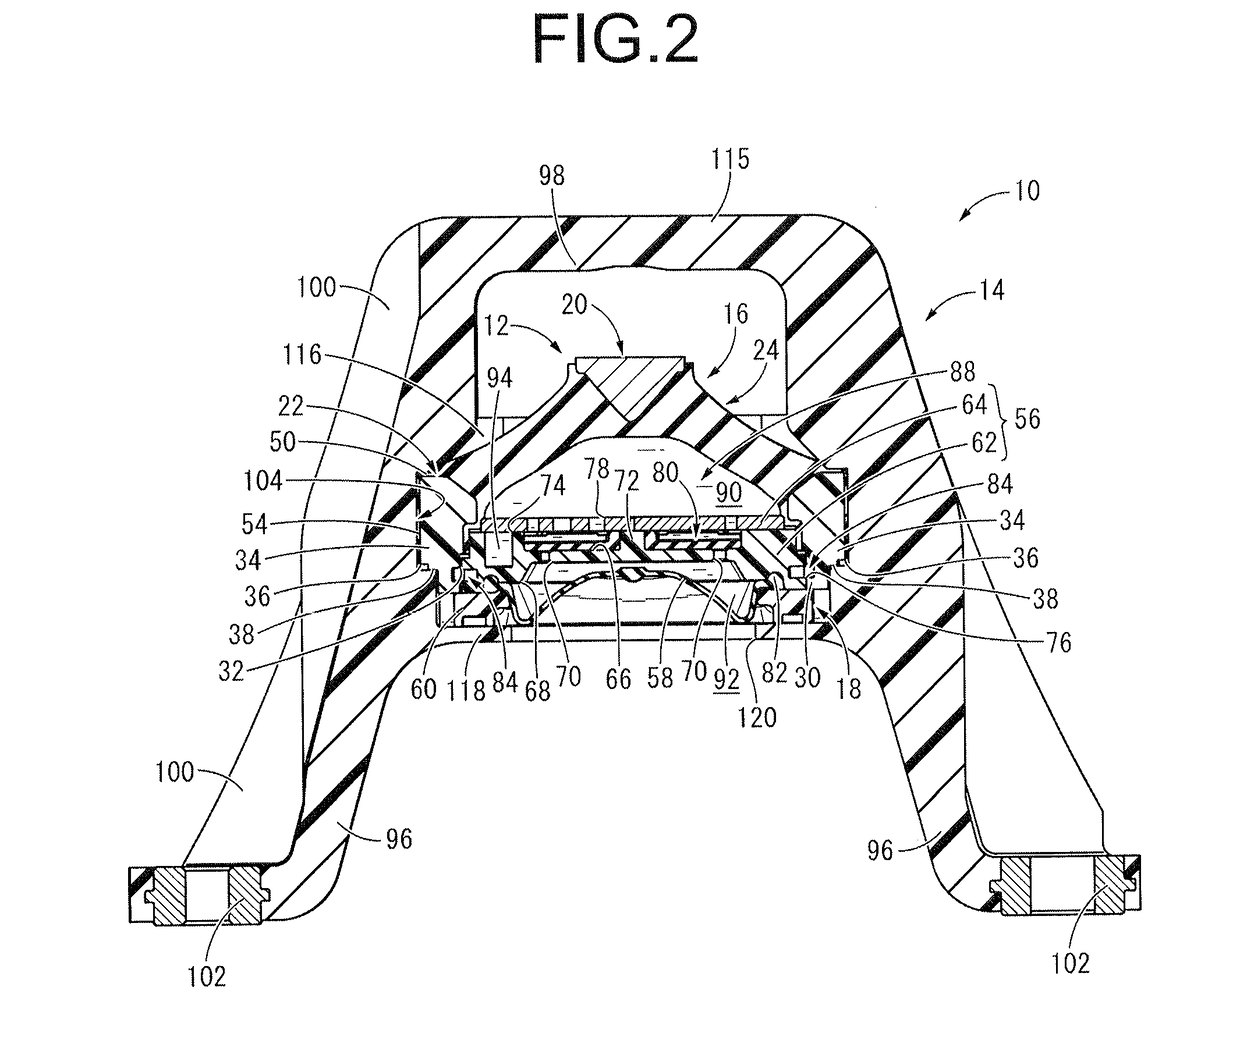 Bracket-equipped vibration-damping device